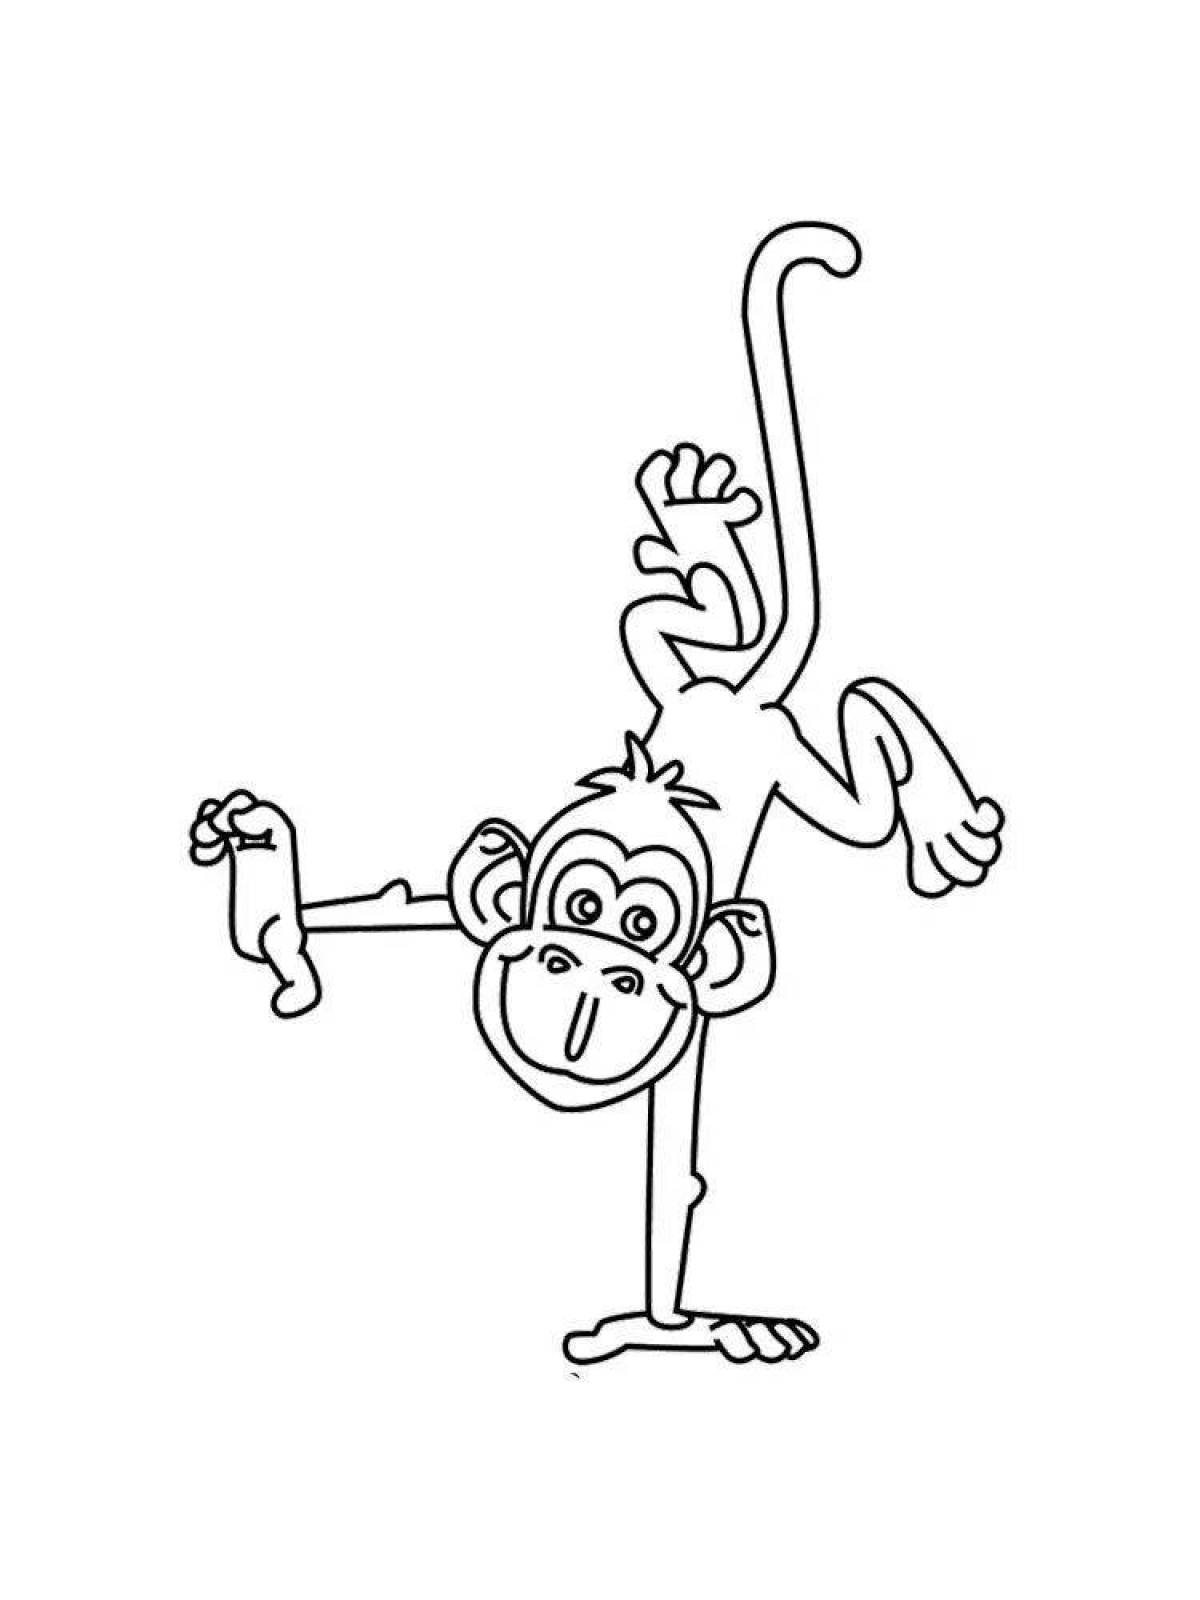 Playful monkey coloring book